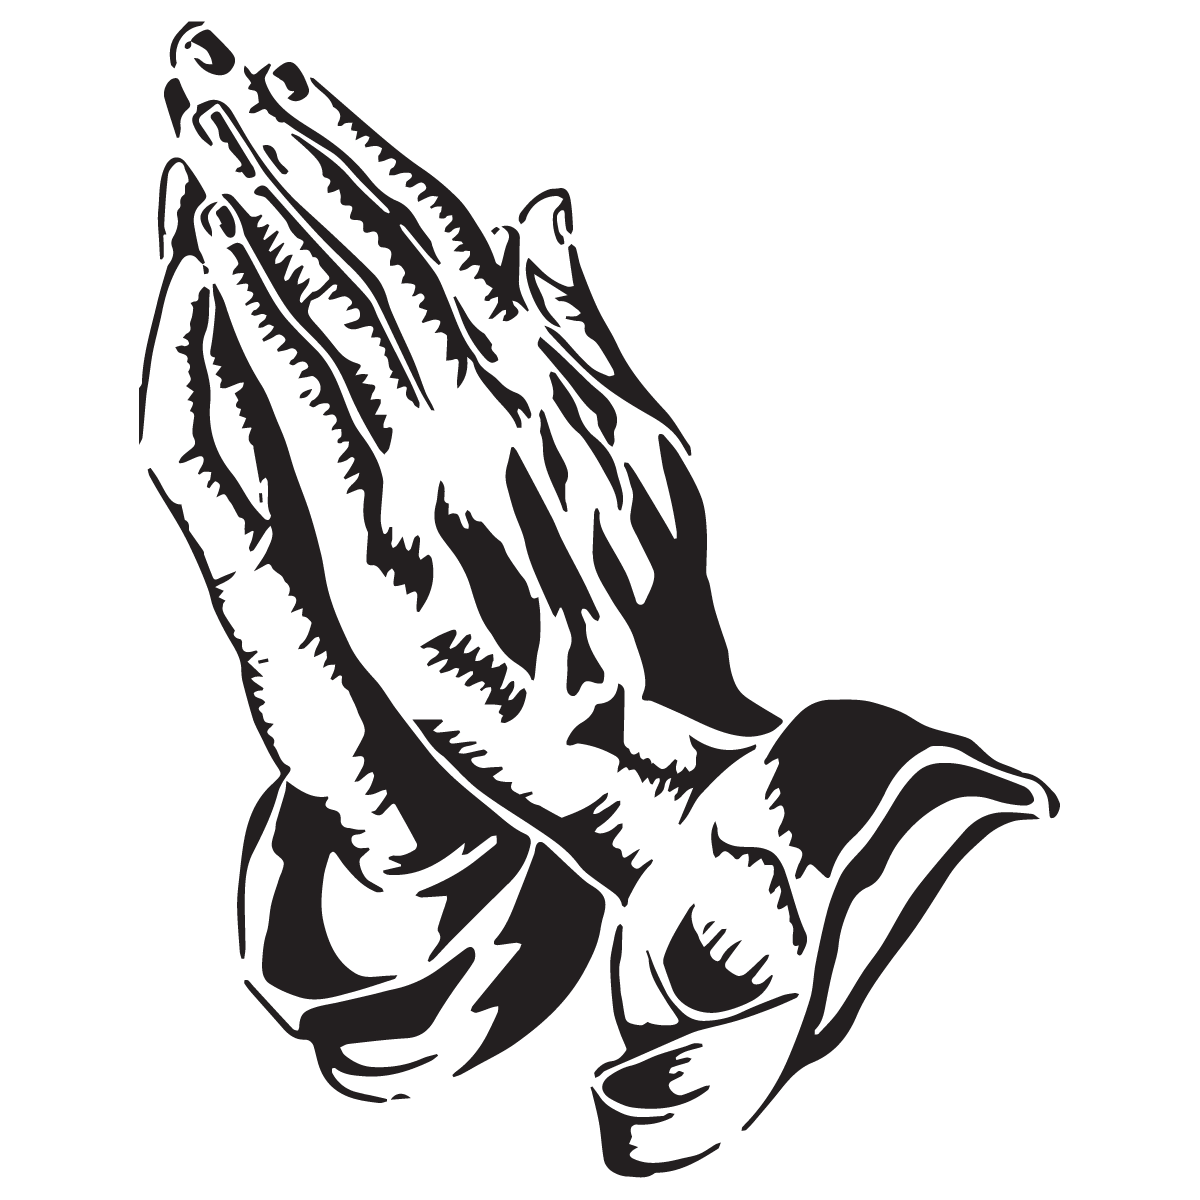 Hands Praying Clipart PNG Free File Download